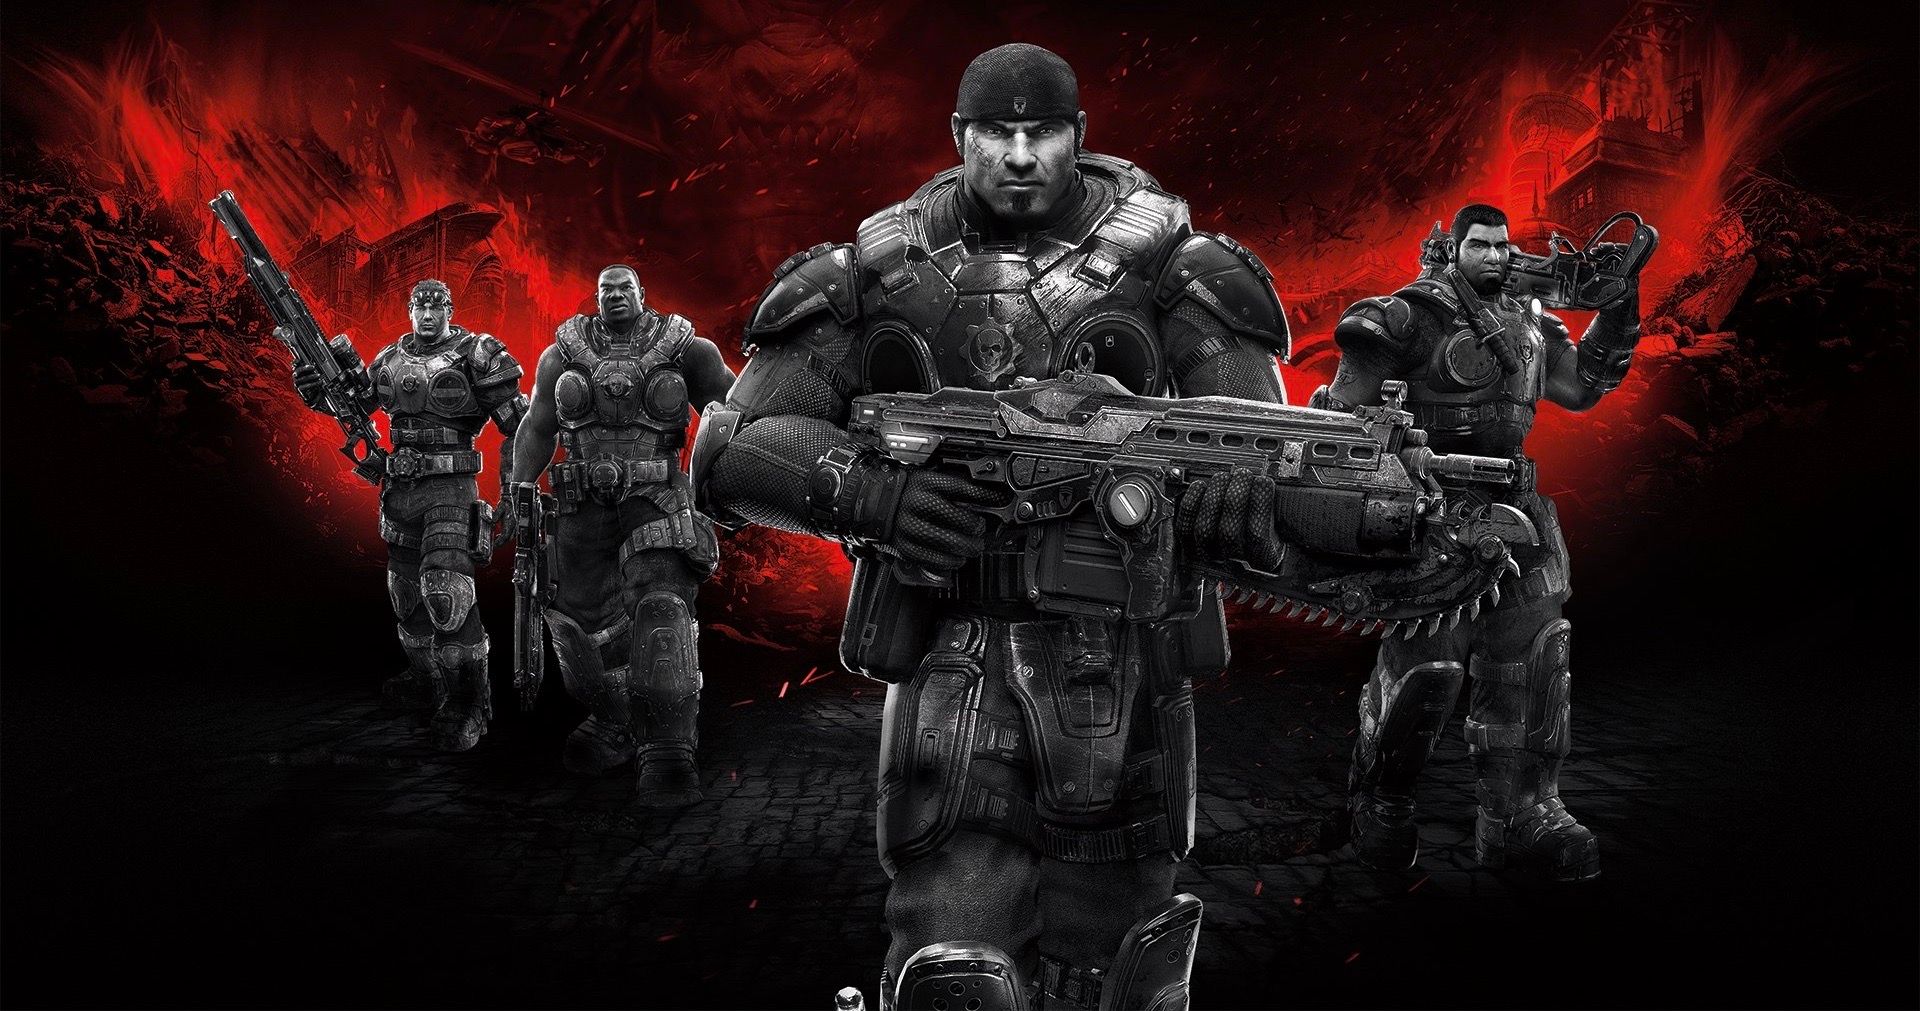 download free gears of war 4 xbox series x